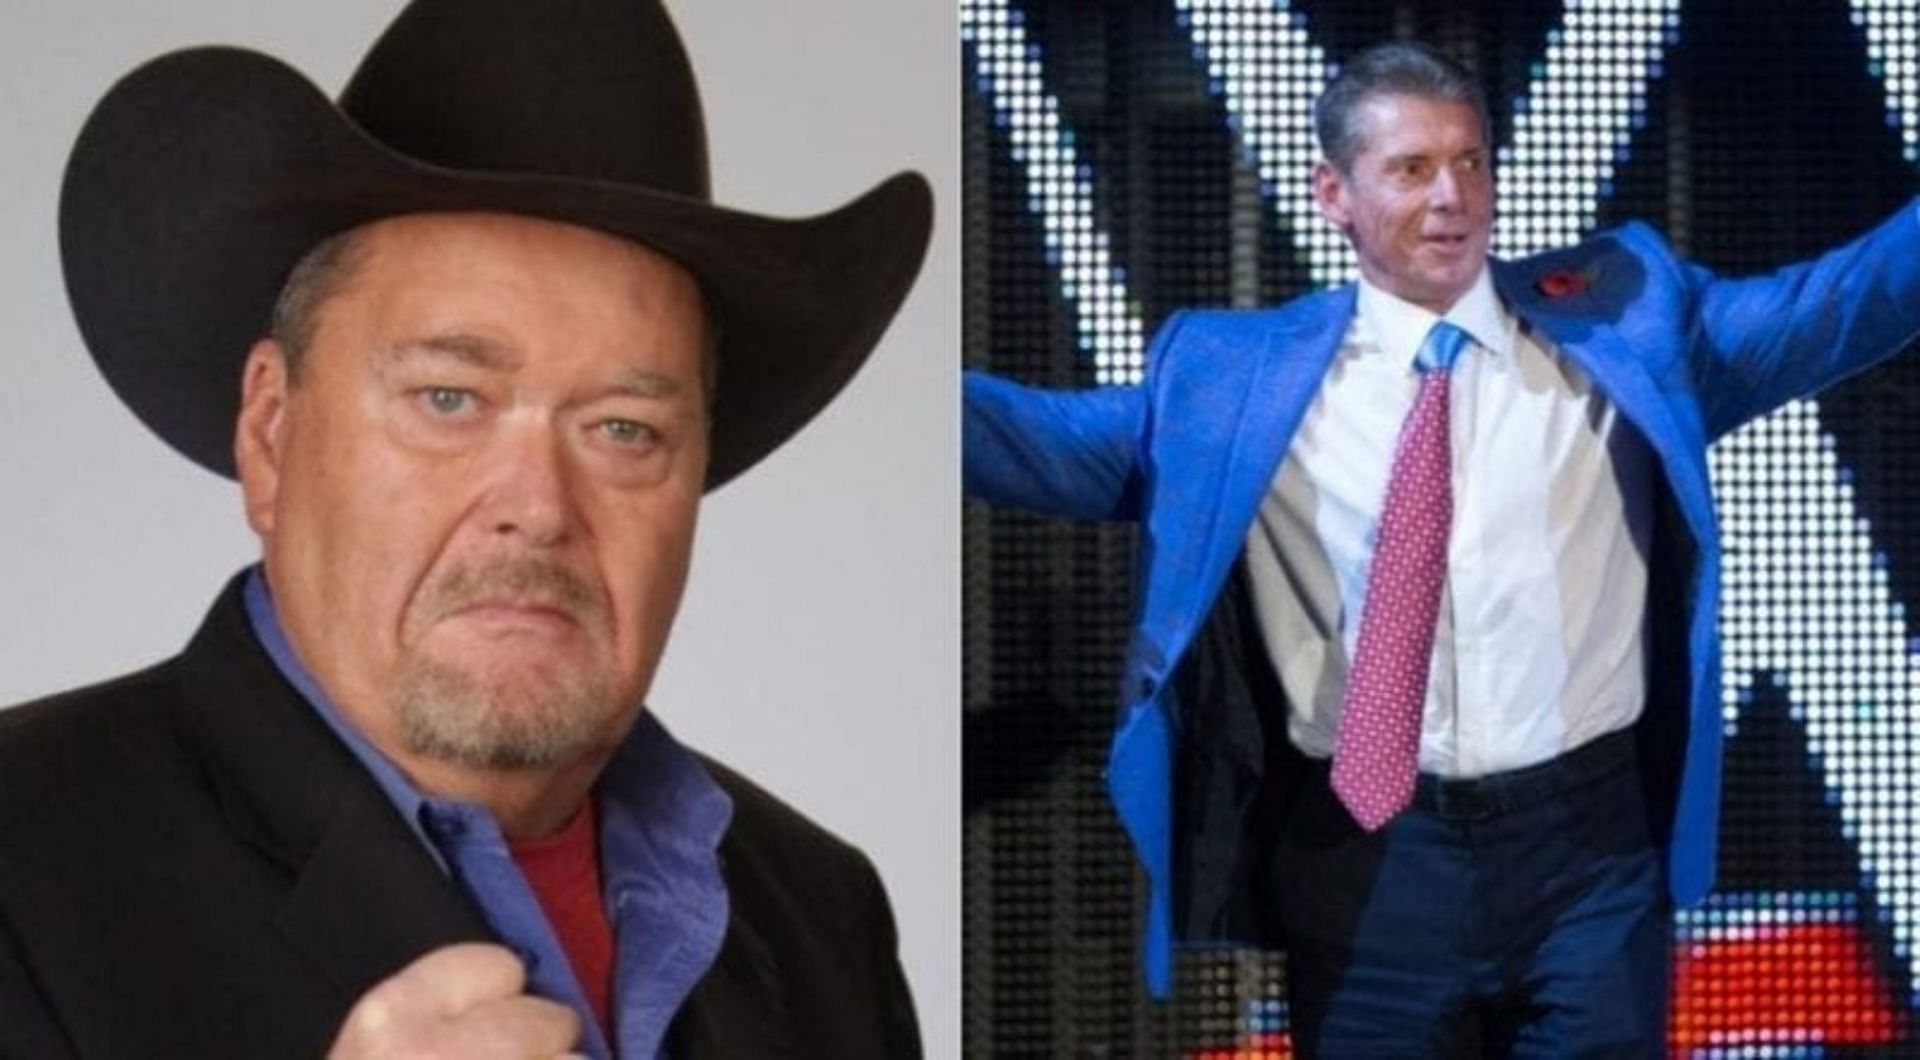 Jim Ross believes Vince McMahon saw his younger self in HBK.